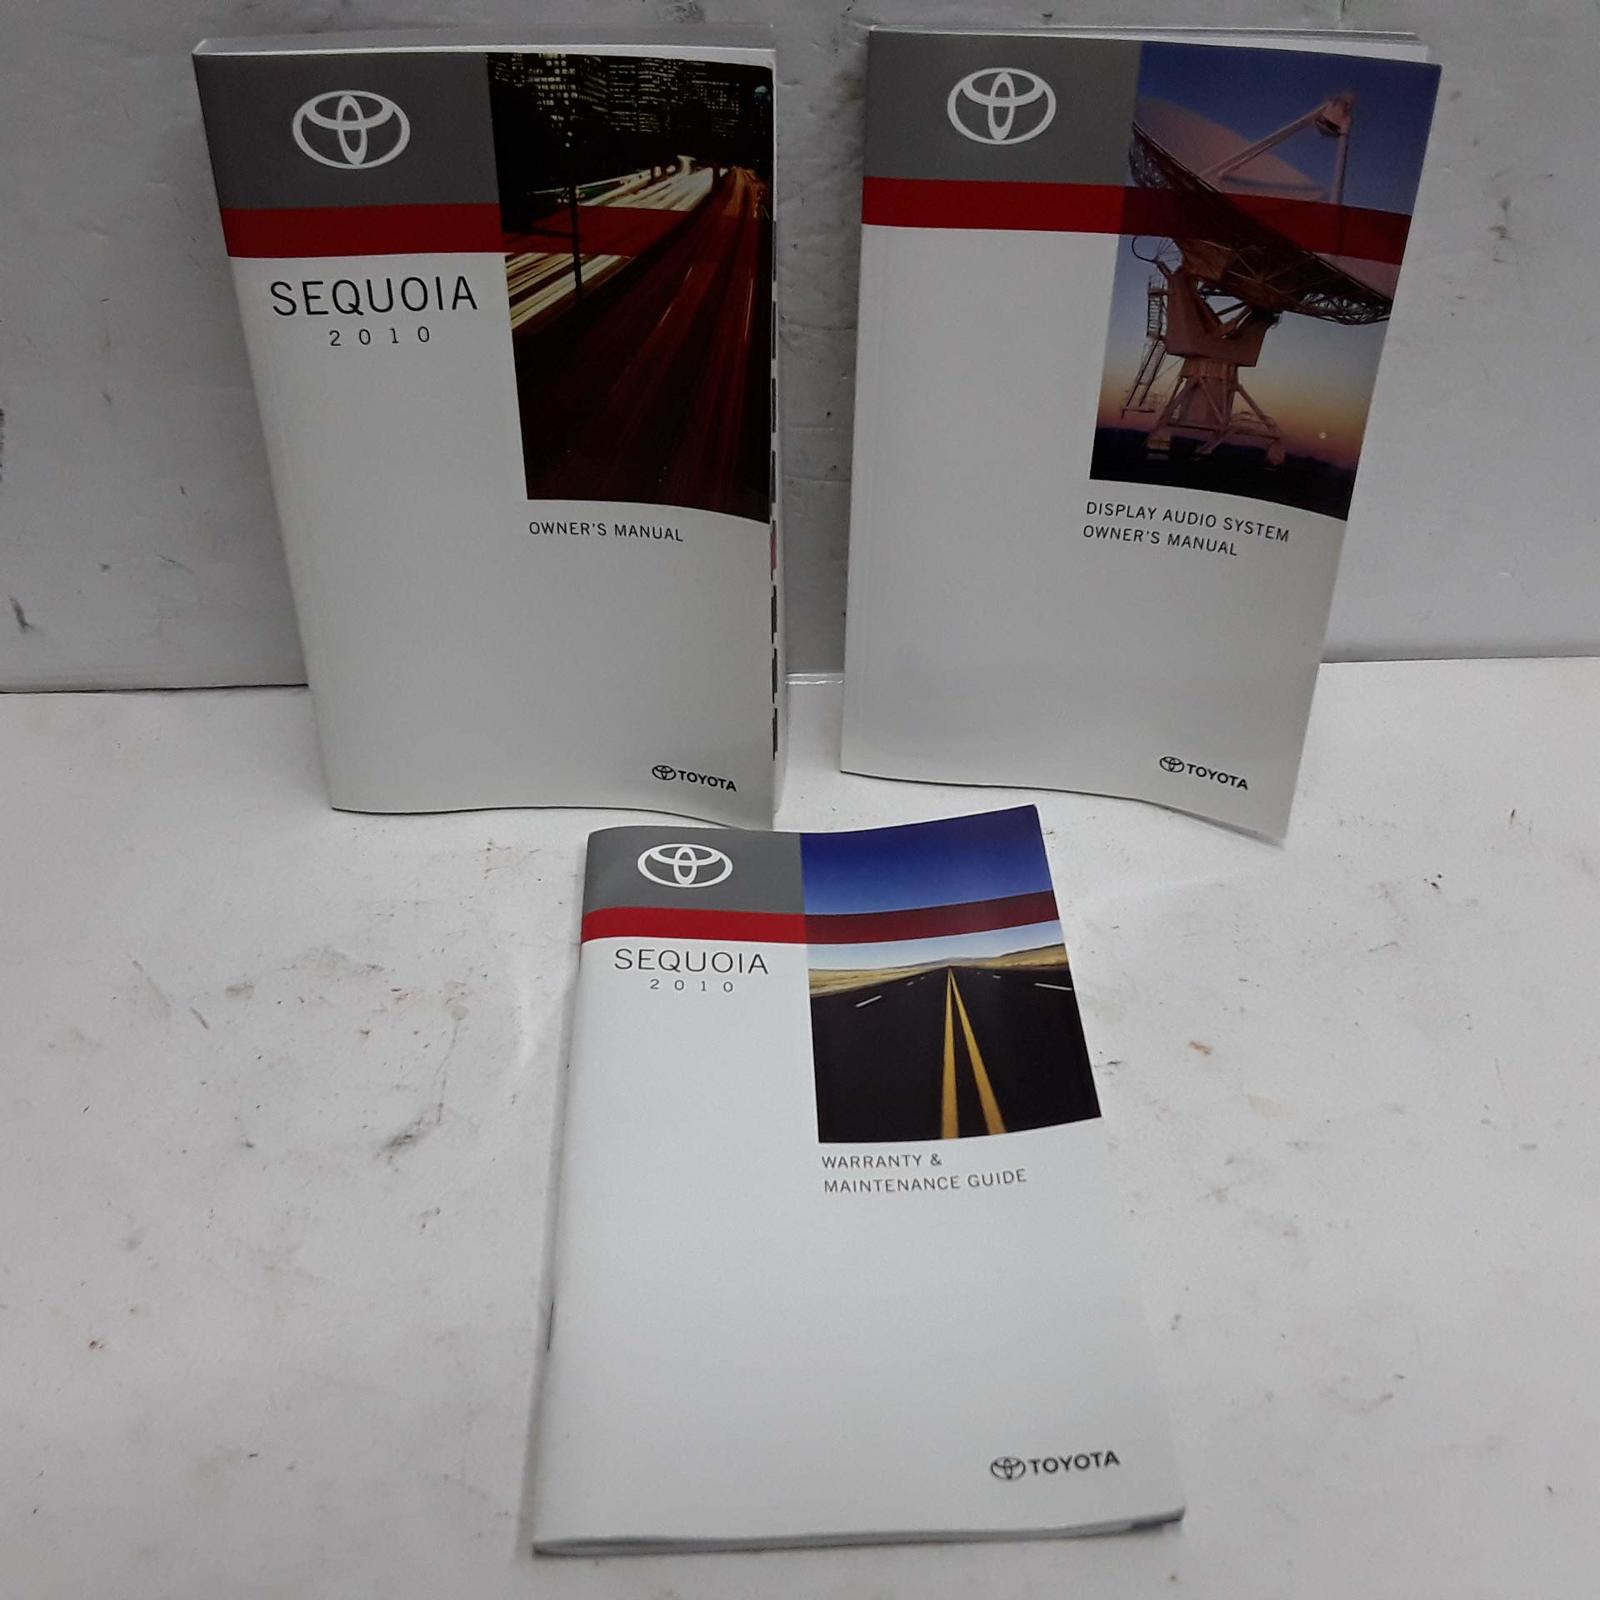 Primary image for 2010 Toyota Sequoia Owners Manual [Paperback]